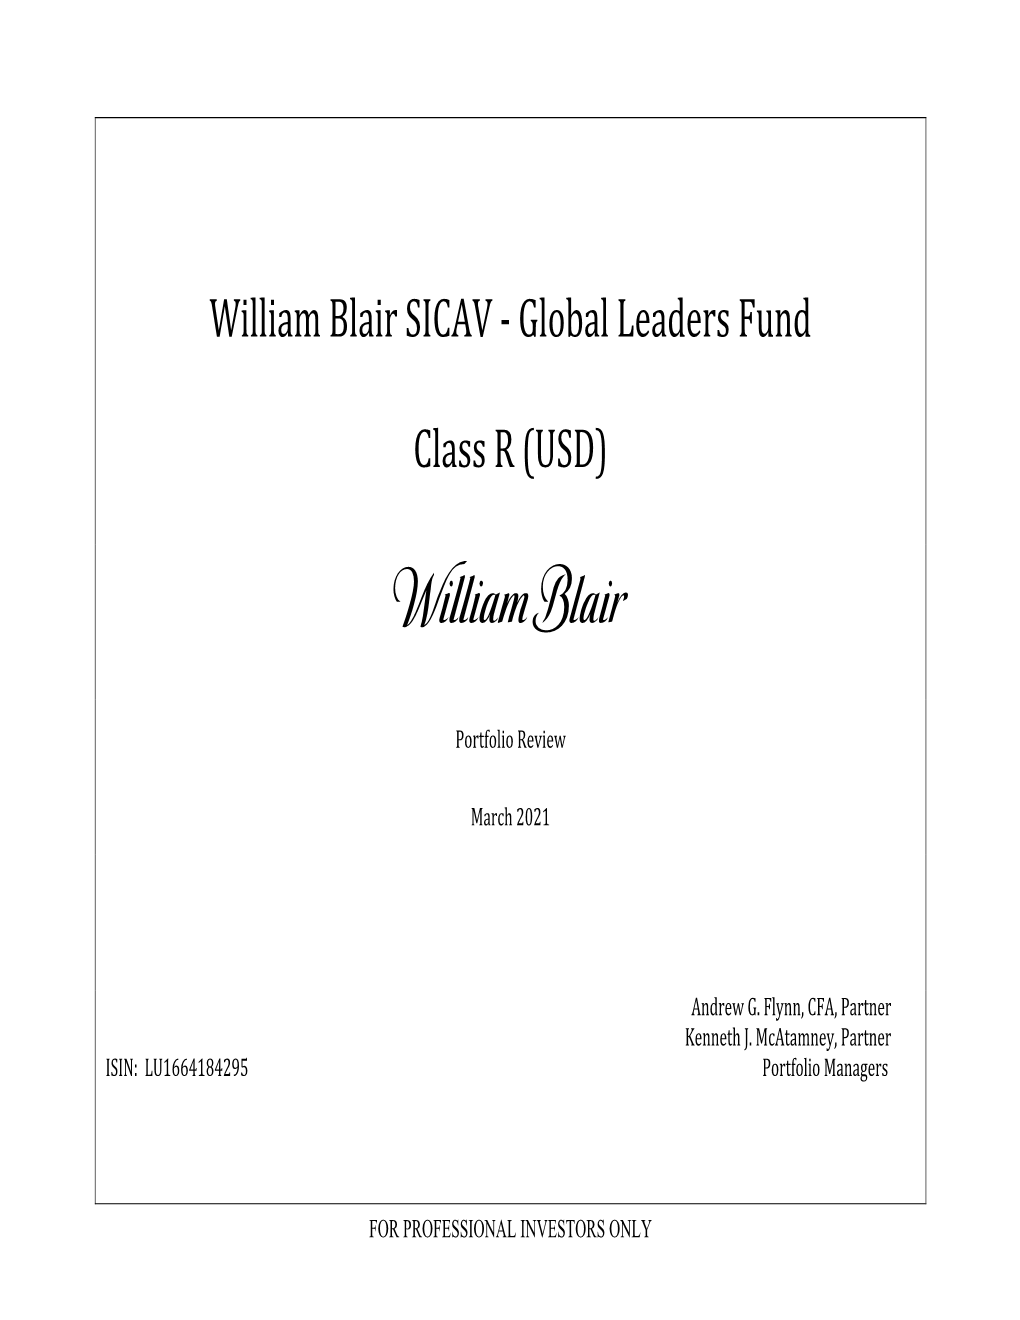 Global Leaders Fund Class R (USD)